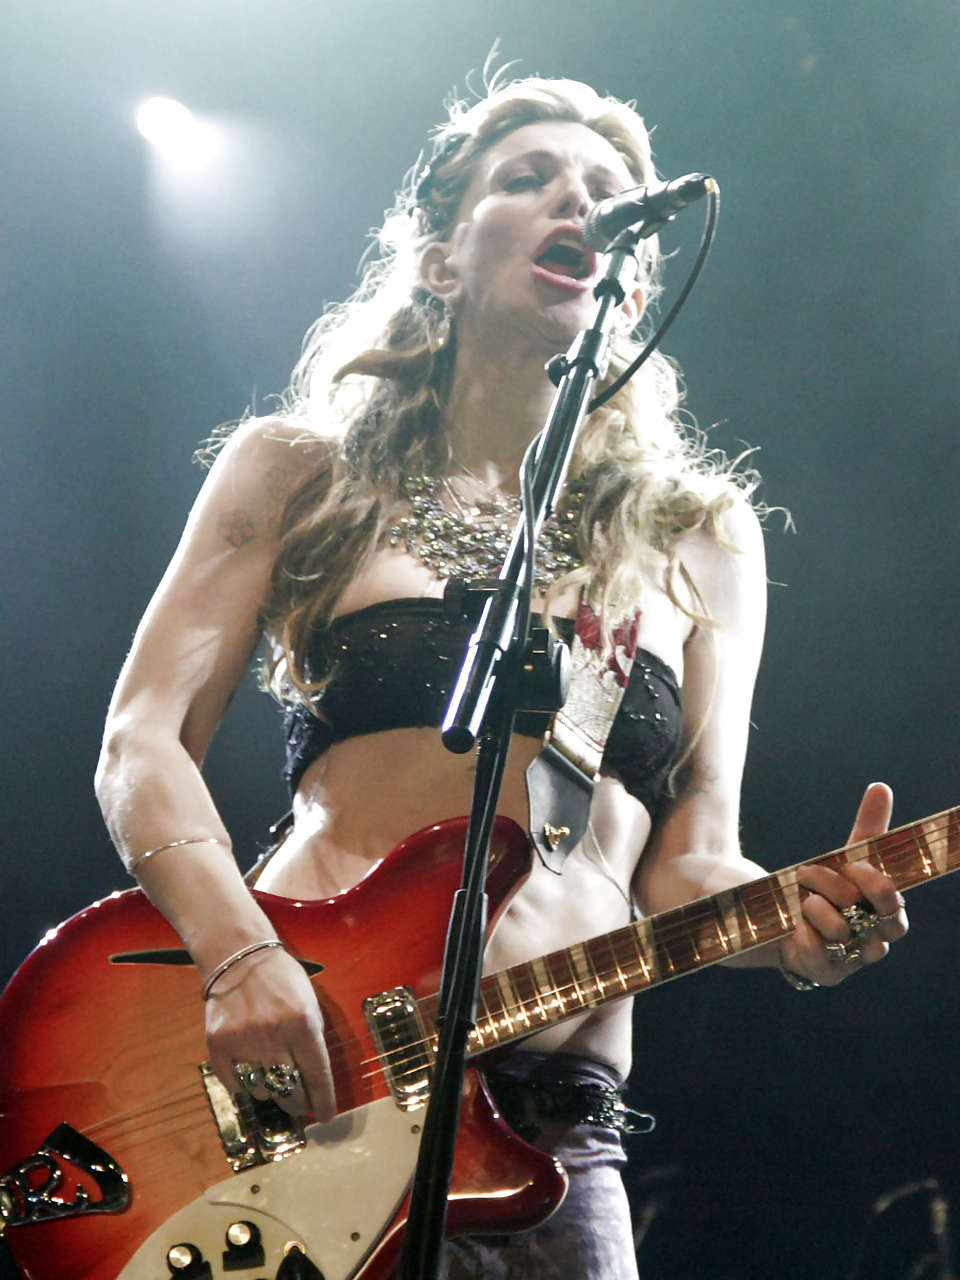 Courtney Love stripping down to topless and show tits on stage #75279501